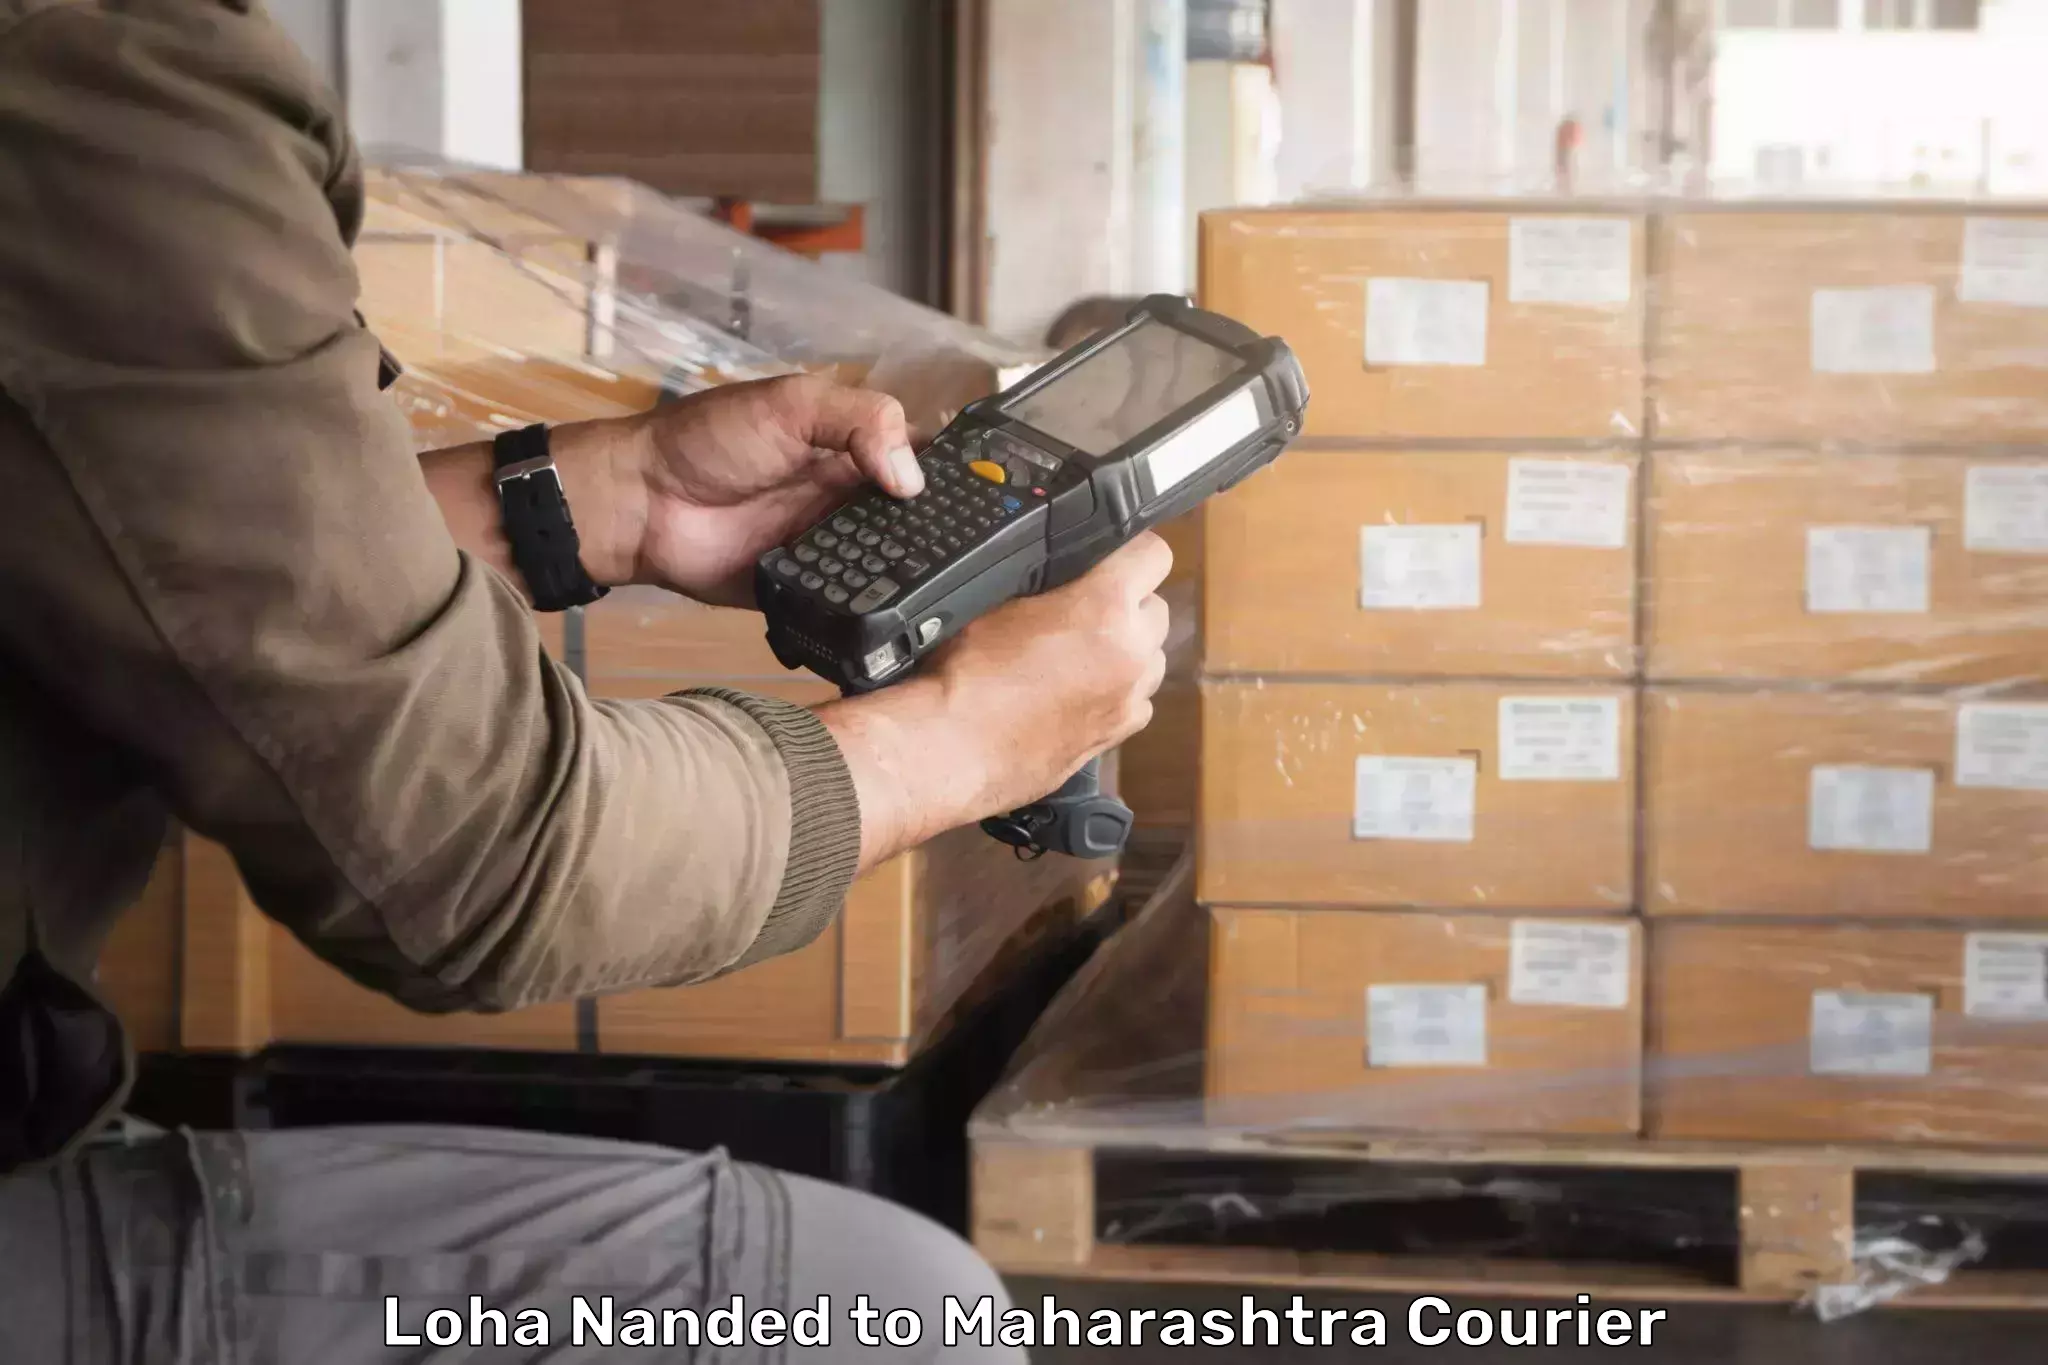 Multi-city courier in Loha Nanded to Pune